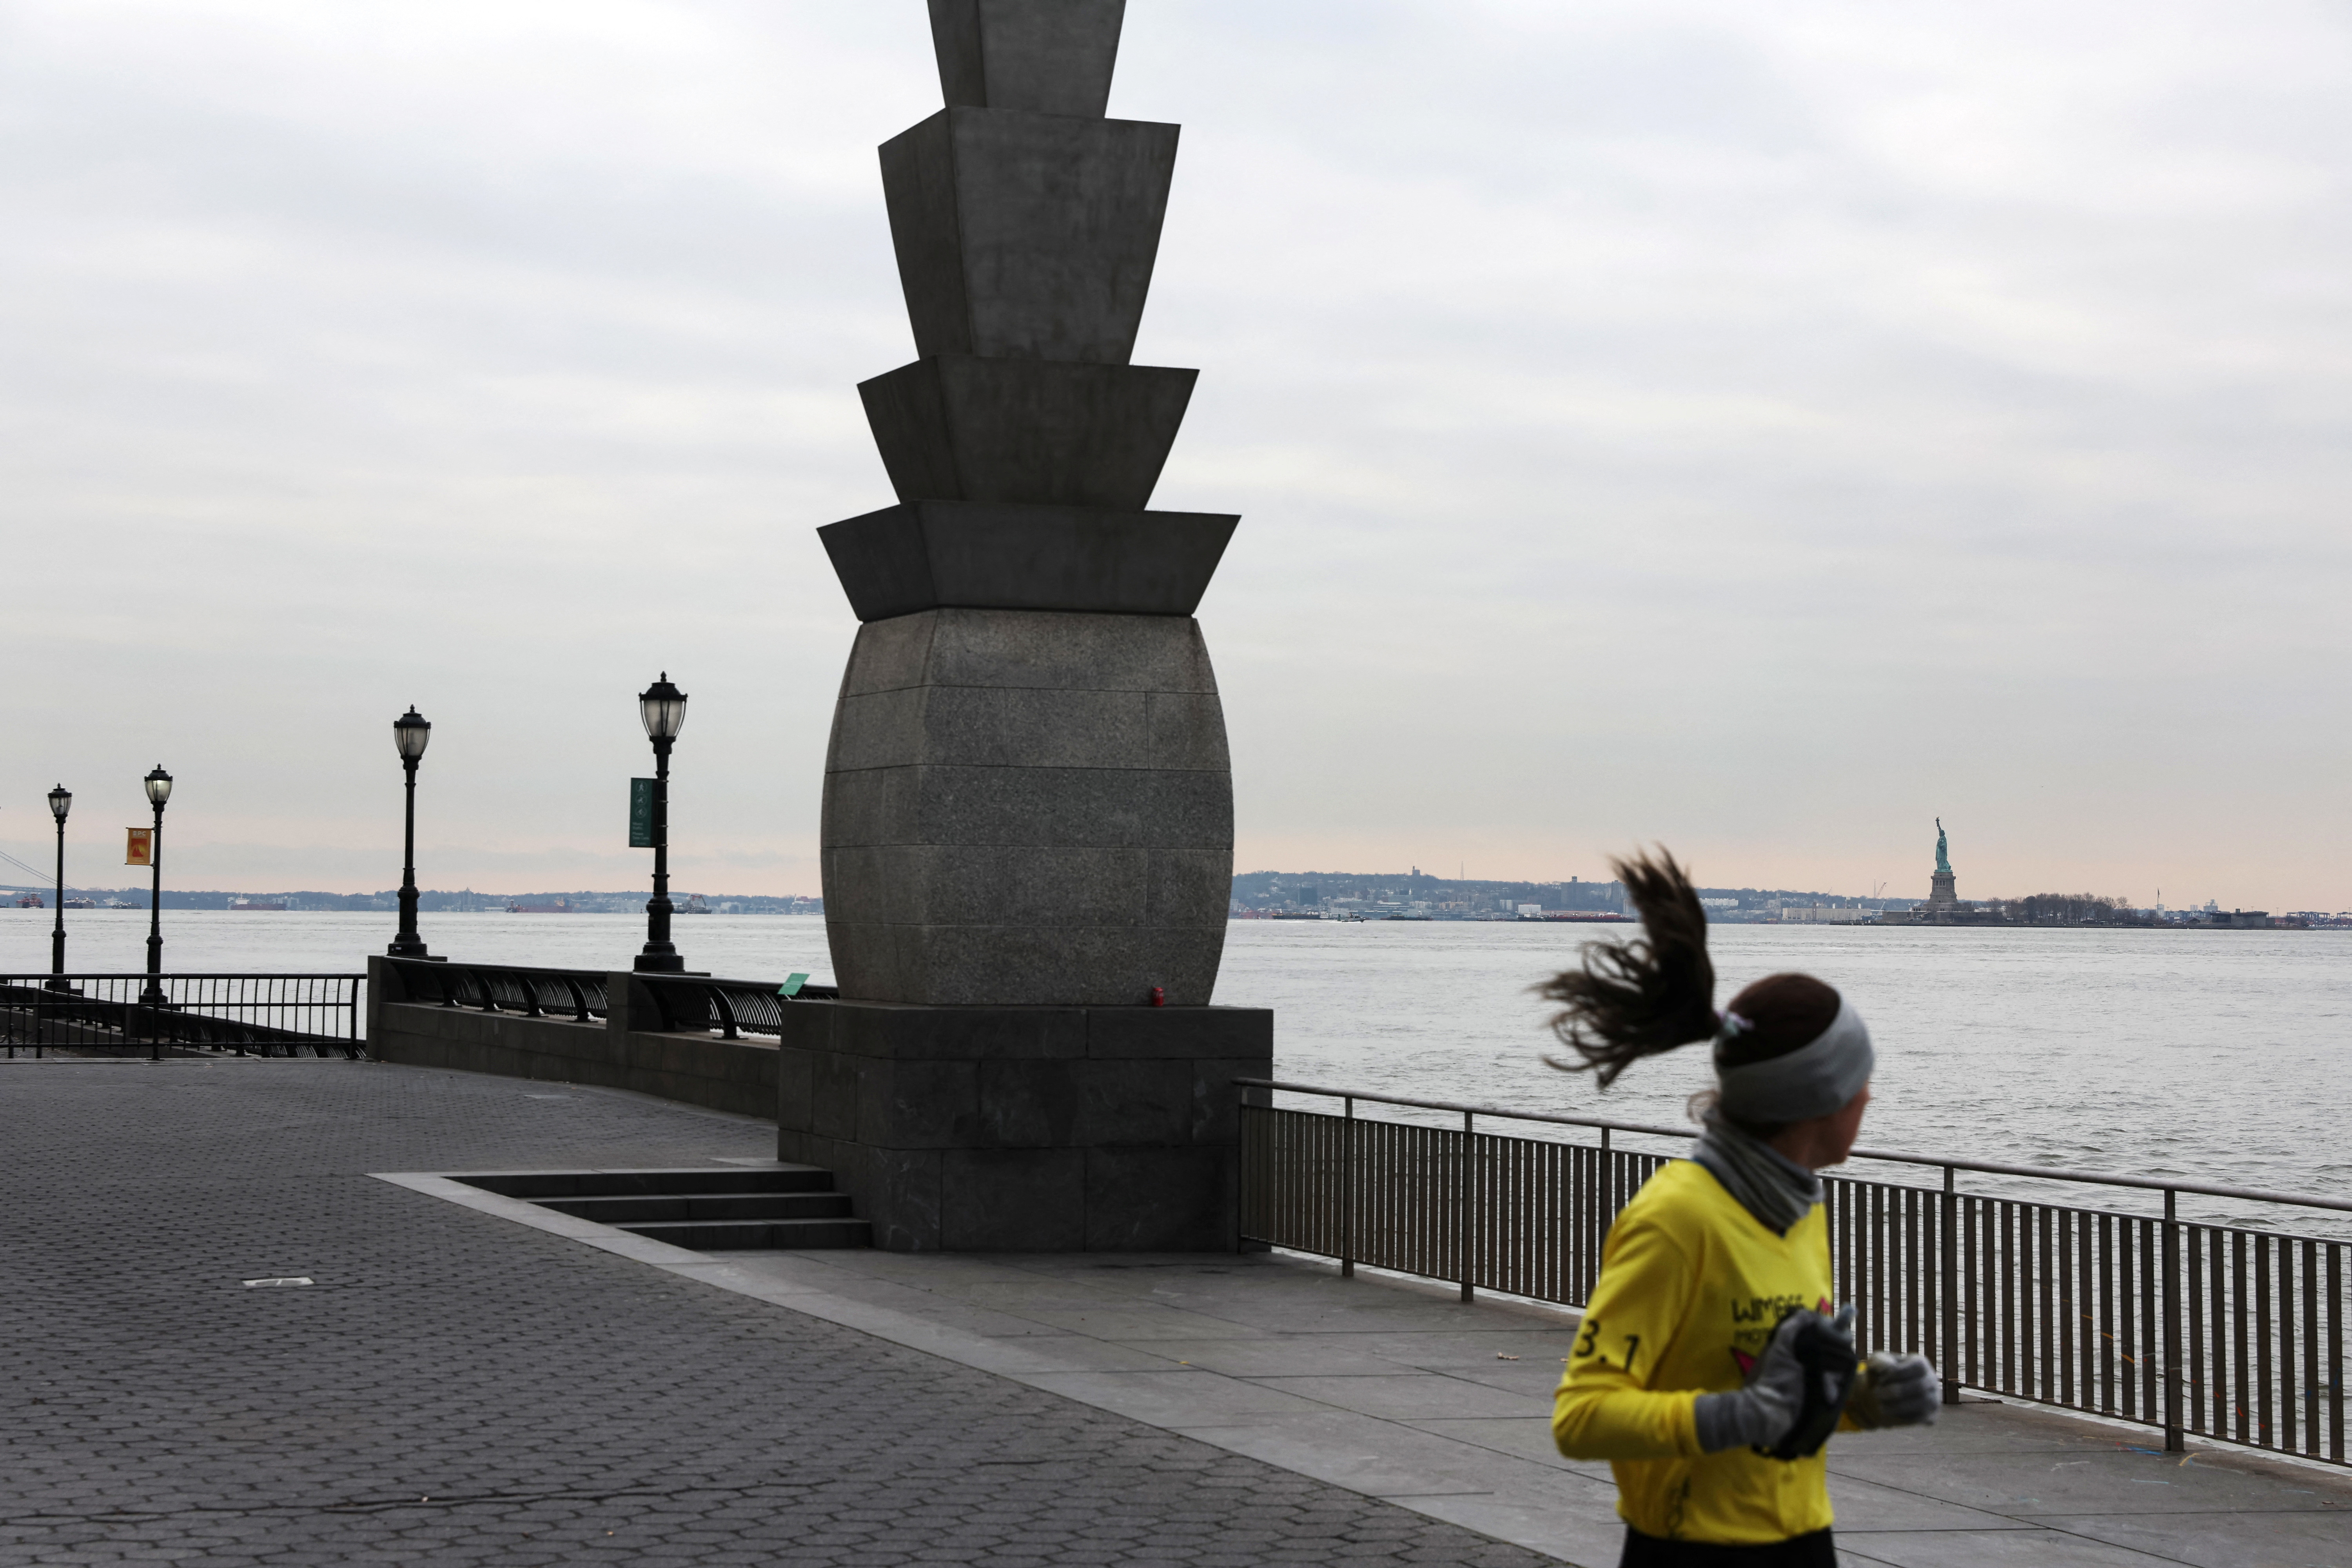 The Statue of Liberty stands on Liberty Island in New York Harbor as a woman jogs by in New York City